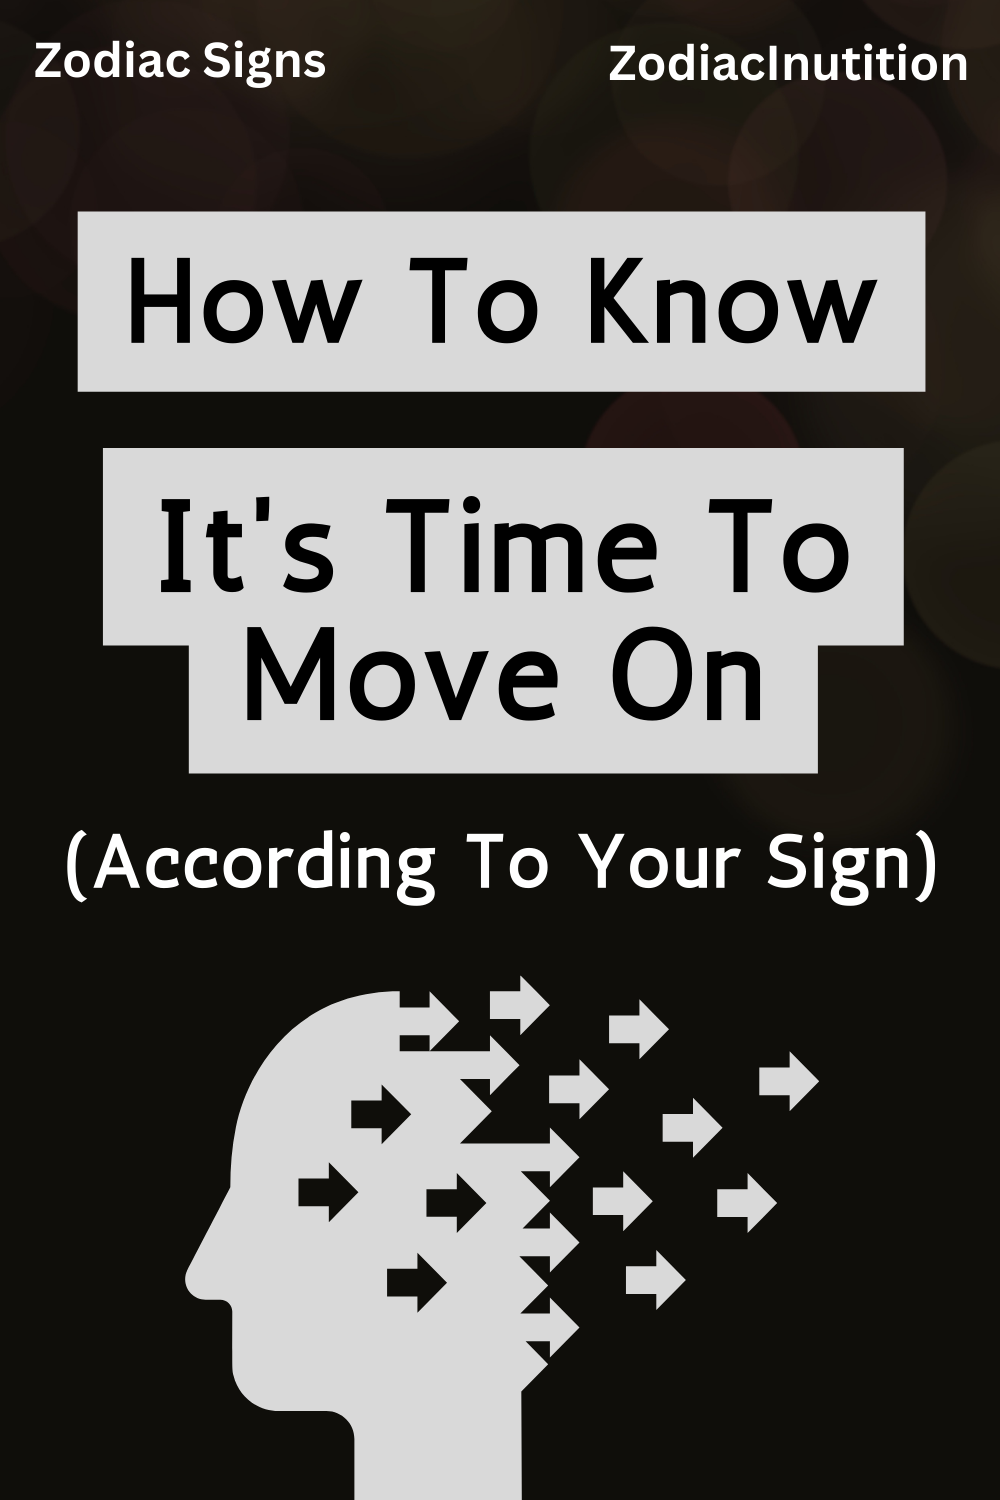 How To Know It's Time To Move On (According To Your Sign)